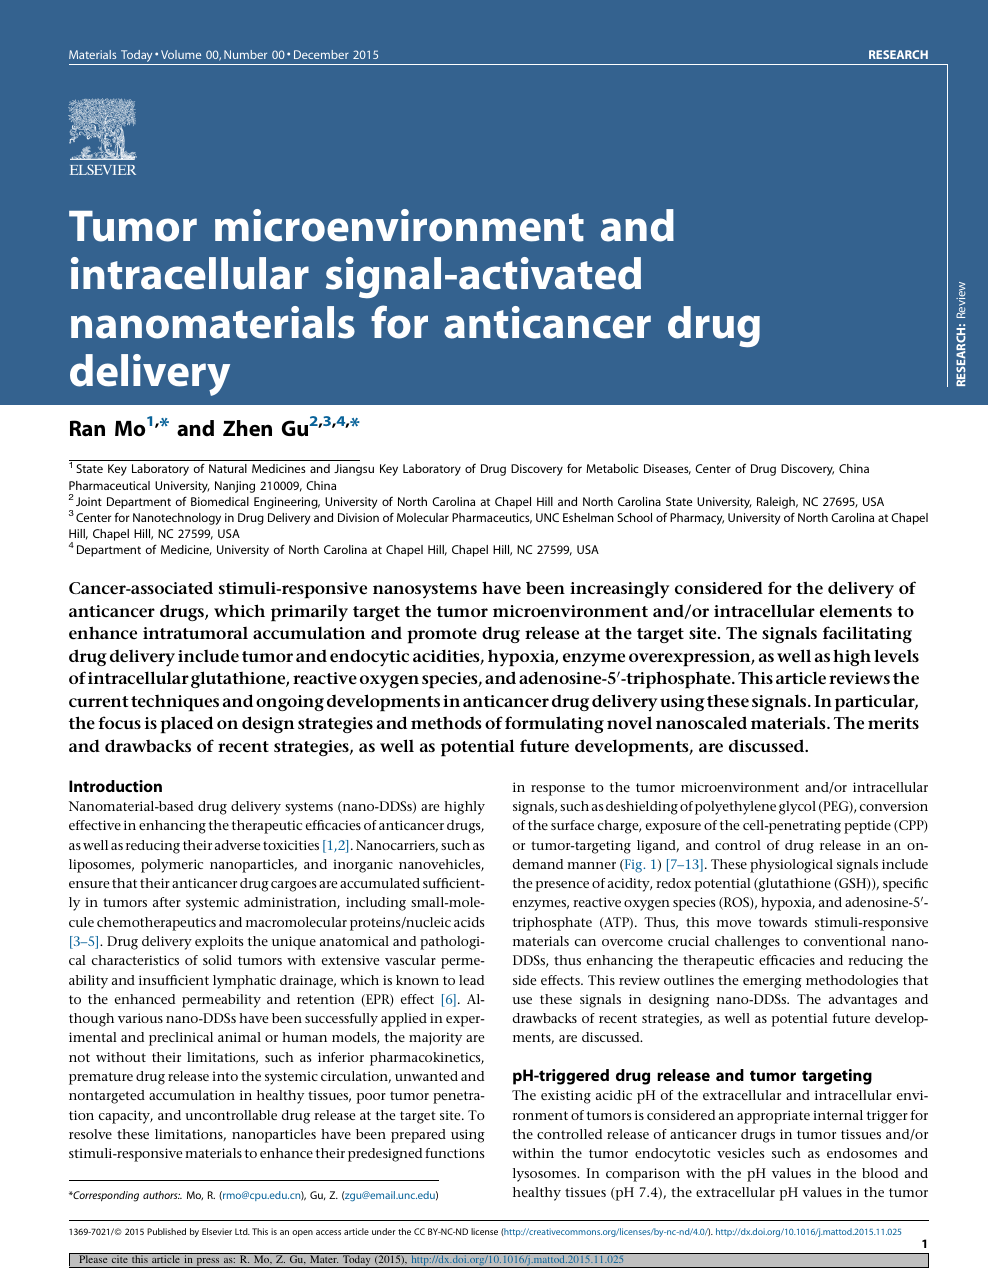 Tumor Microenvironment And Intracellular Signal Activated Nanomaterials For Anticancer Drug Delivery Topic Of Research Paper In Materials Engineering Download Scholarly Article Pdf And Read For Free On Cyberleninka Open Science Hub